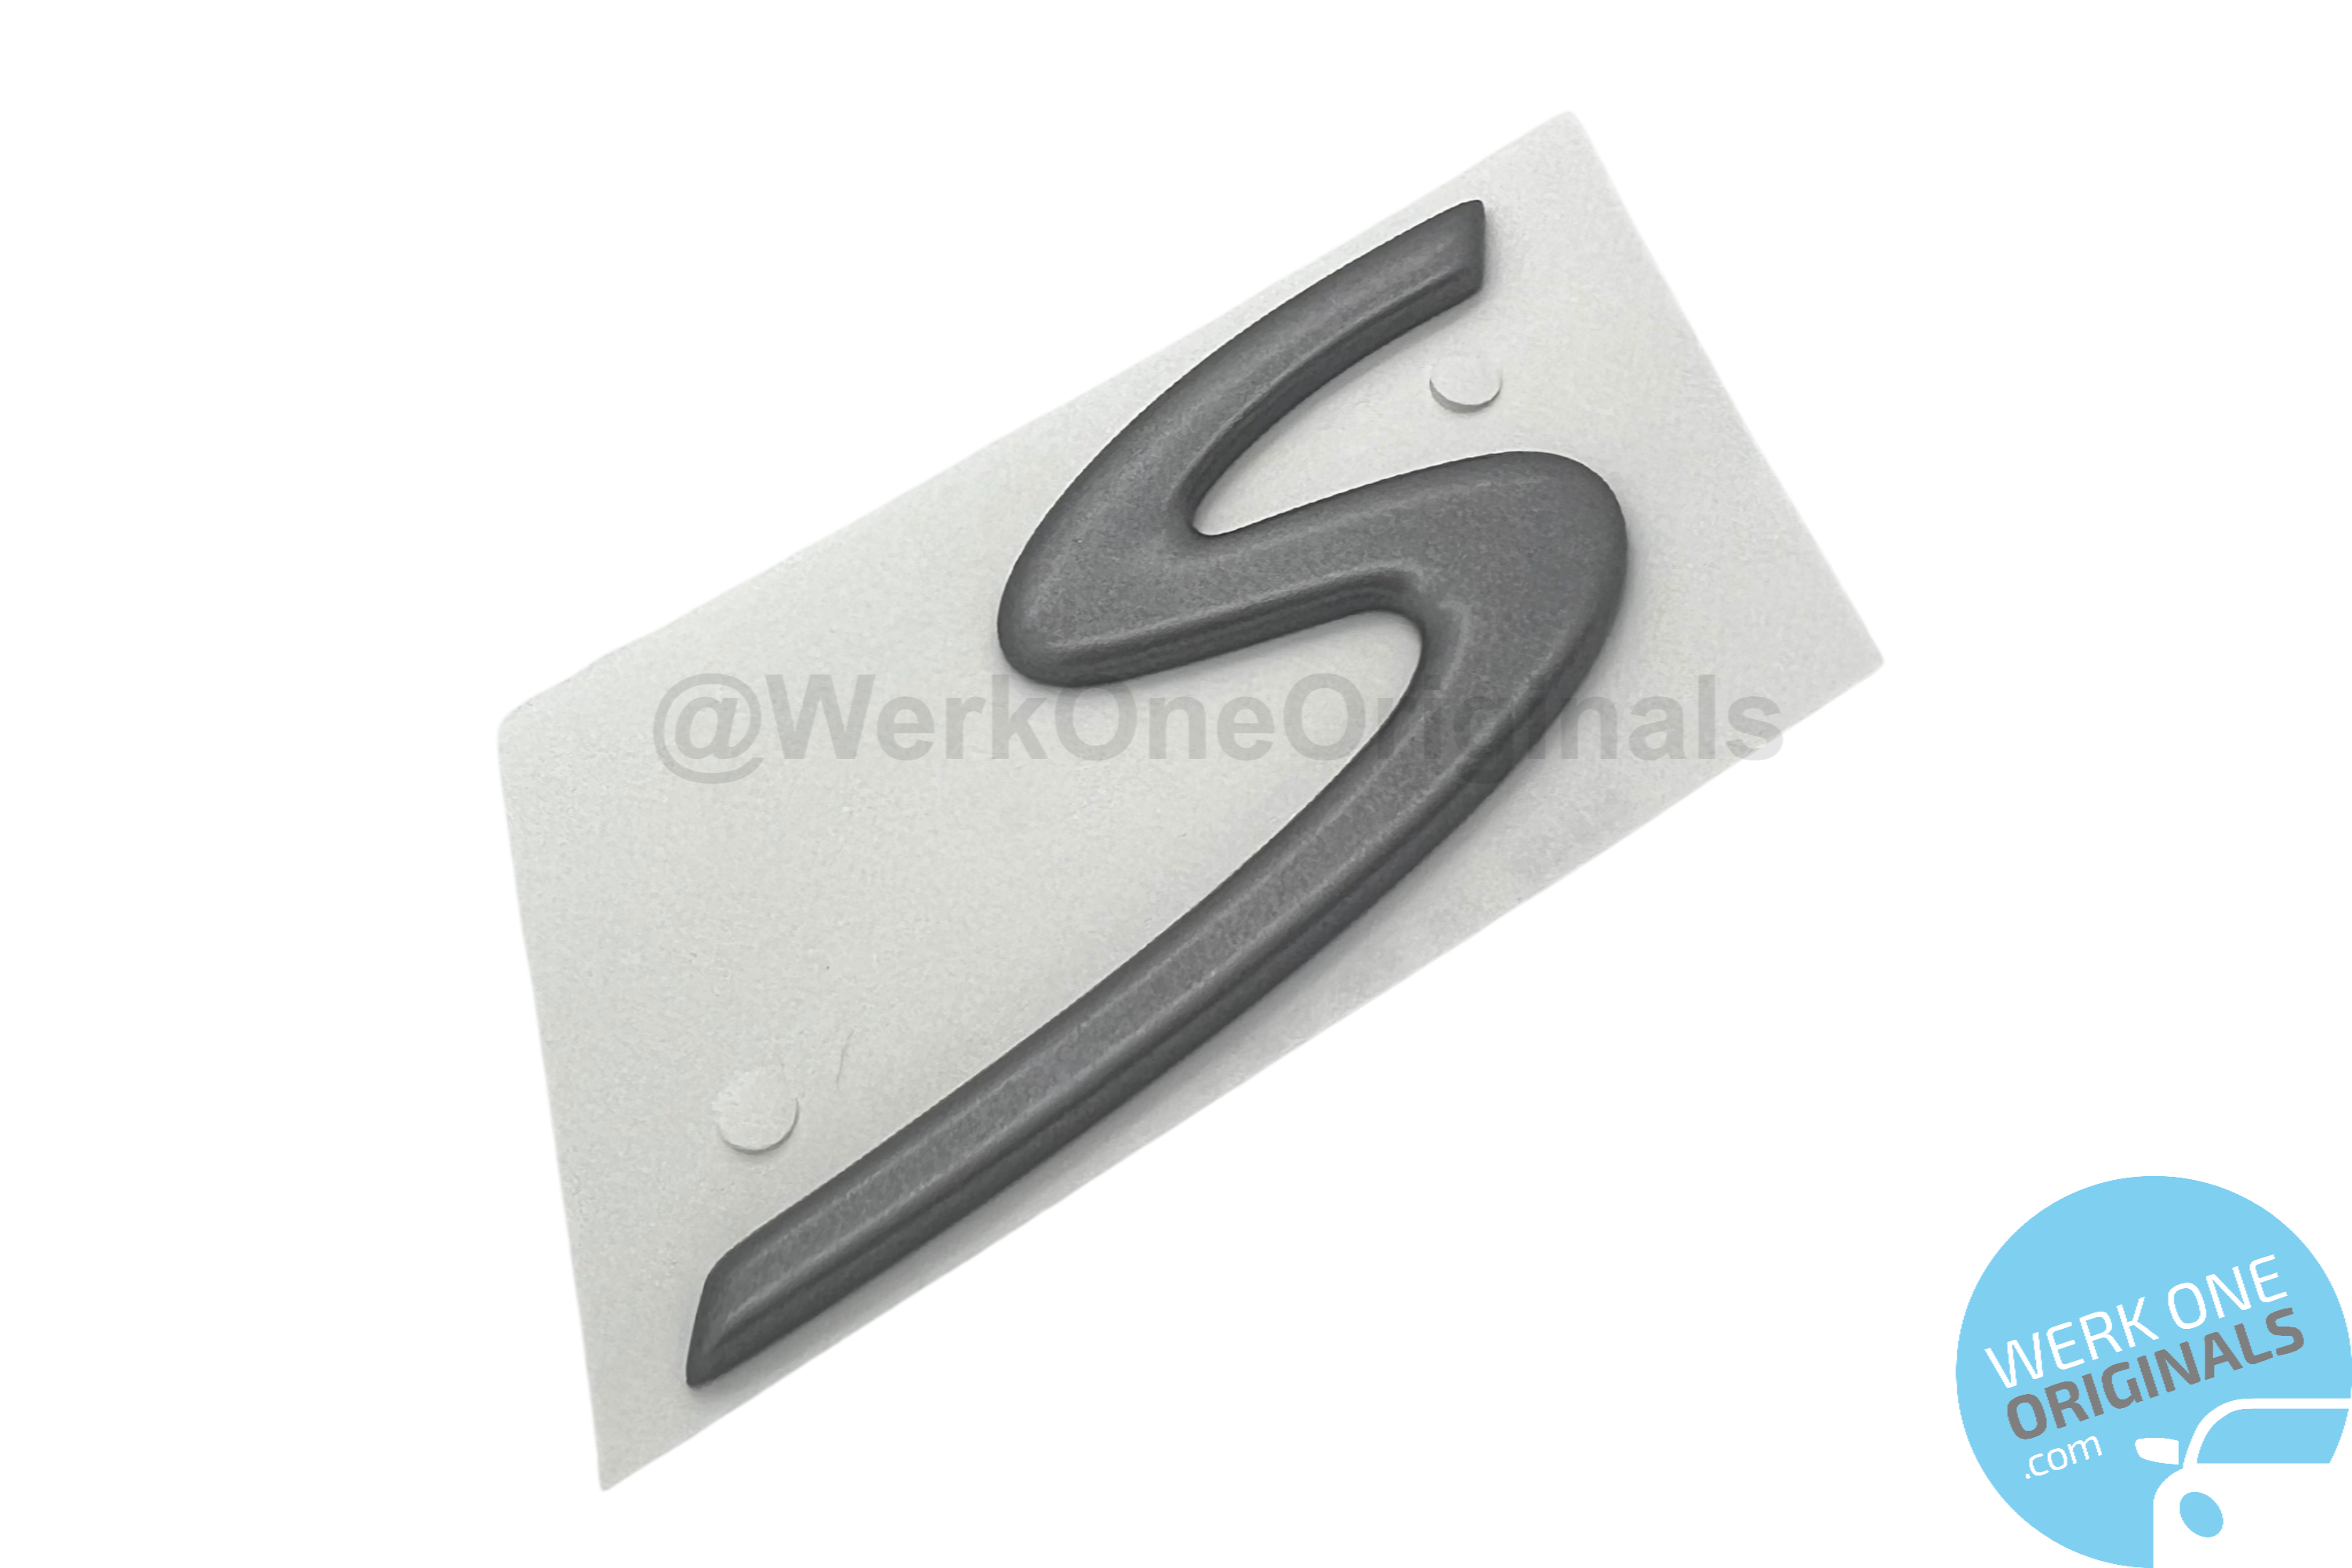 Porsche Official 'S' Rear Badge Decal in Titanium Grey for Boxster S Type 986 Models